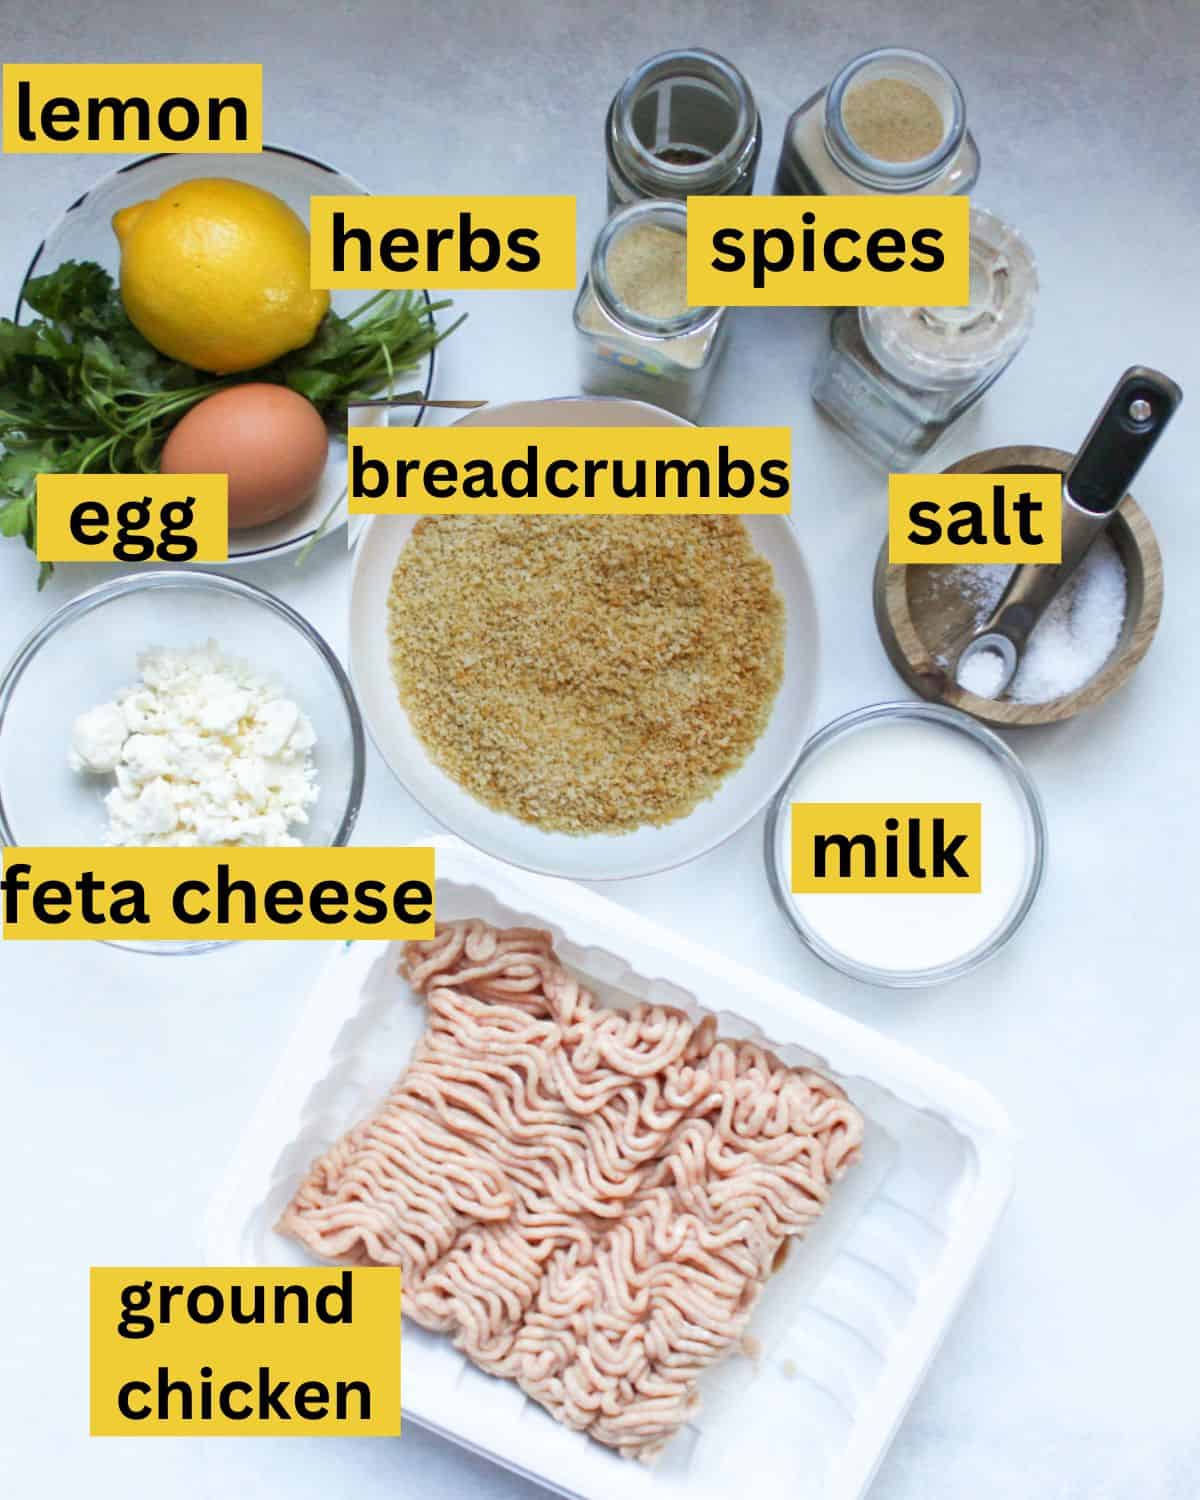 Recipe ingredients on a white background labeled as hers, spices, egg, breadcrumbs, salt, feta cheese, milk ground chicken.